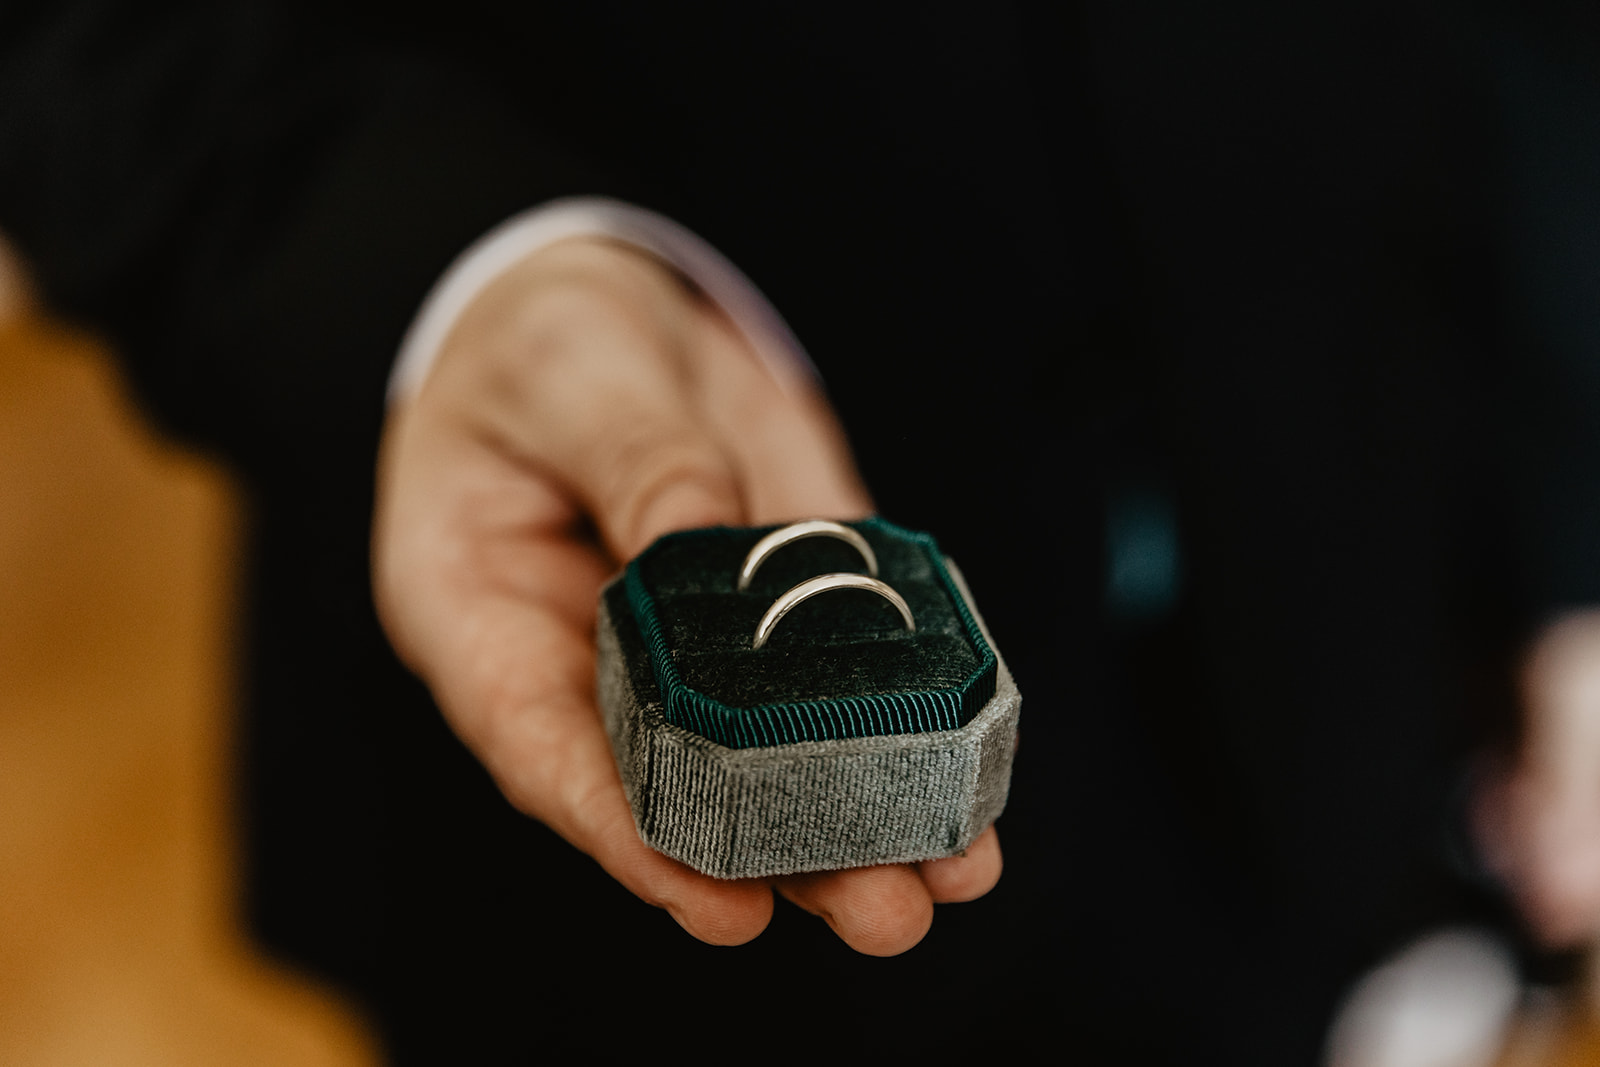 Wedding rings at a France Destination Wedding. Photography and Videography by Olive Joy Photography